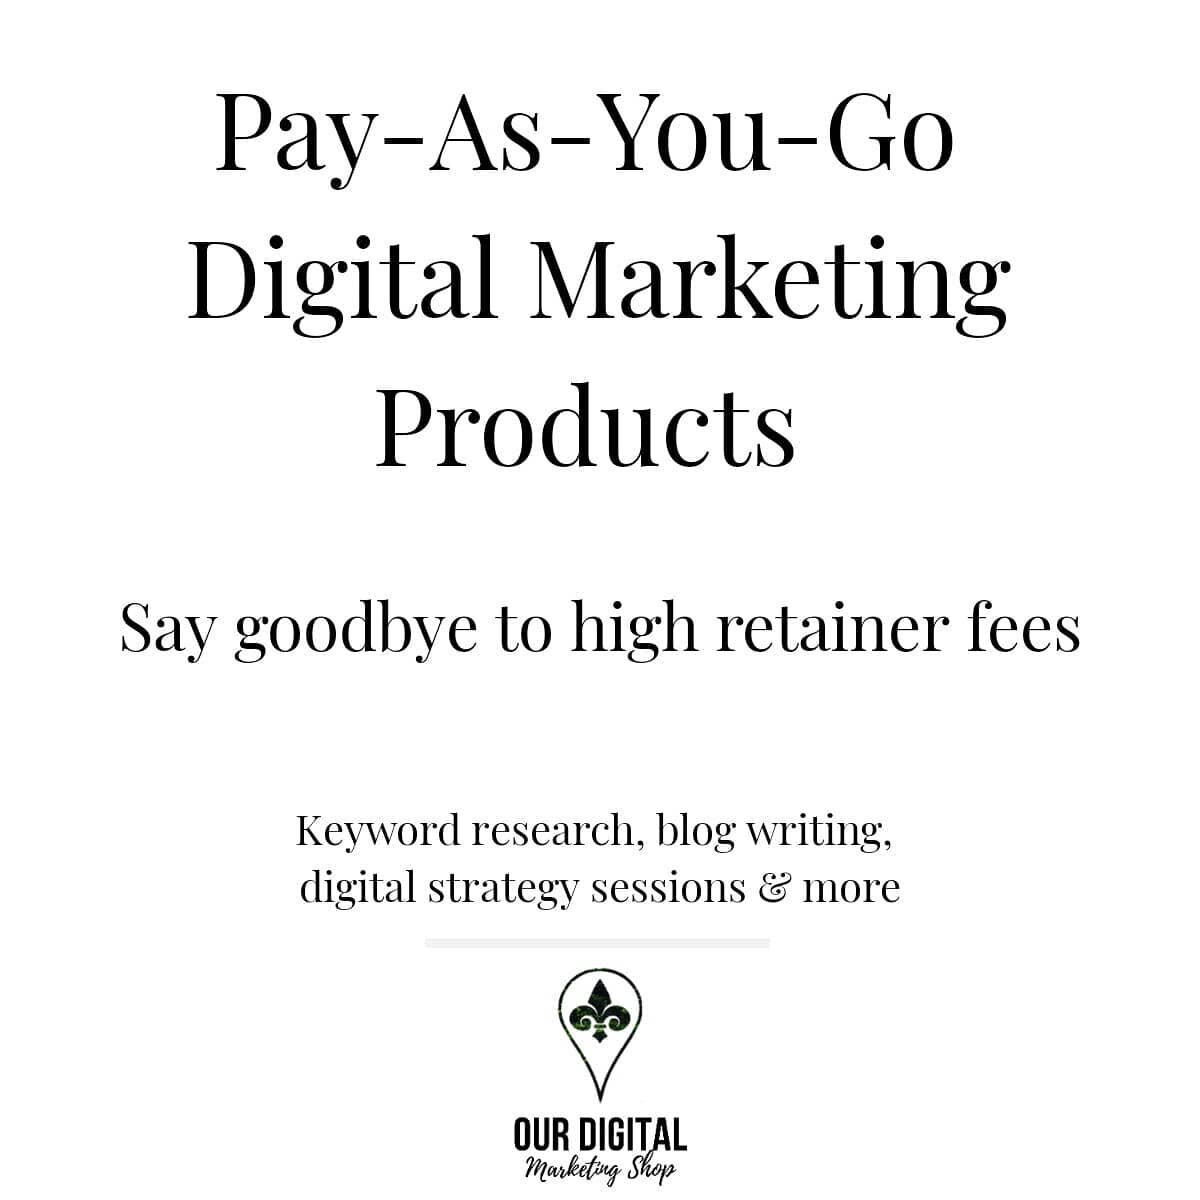 This is for you / / We wanted to design something specifically for small business owners. Our Digital Marketing Shop is a pay-as-you-go digital marketing shop offering one time services and products. There's no high monthly retainer or hidden fees. 
